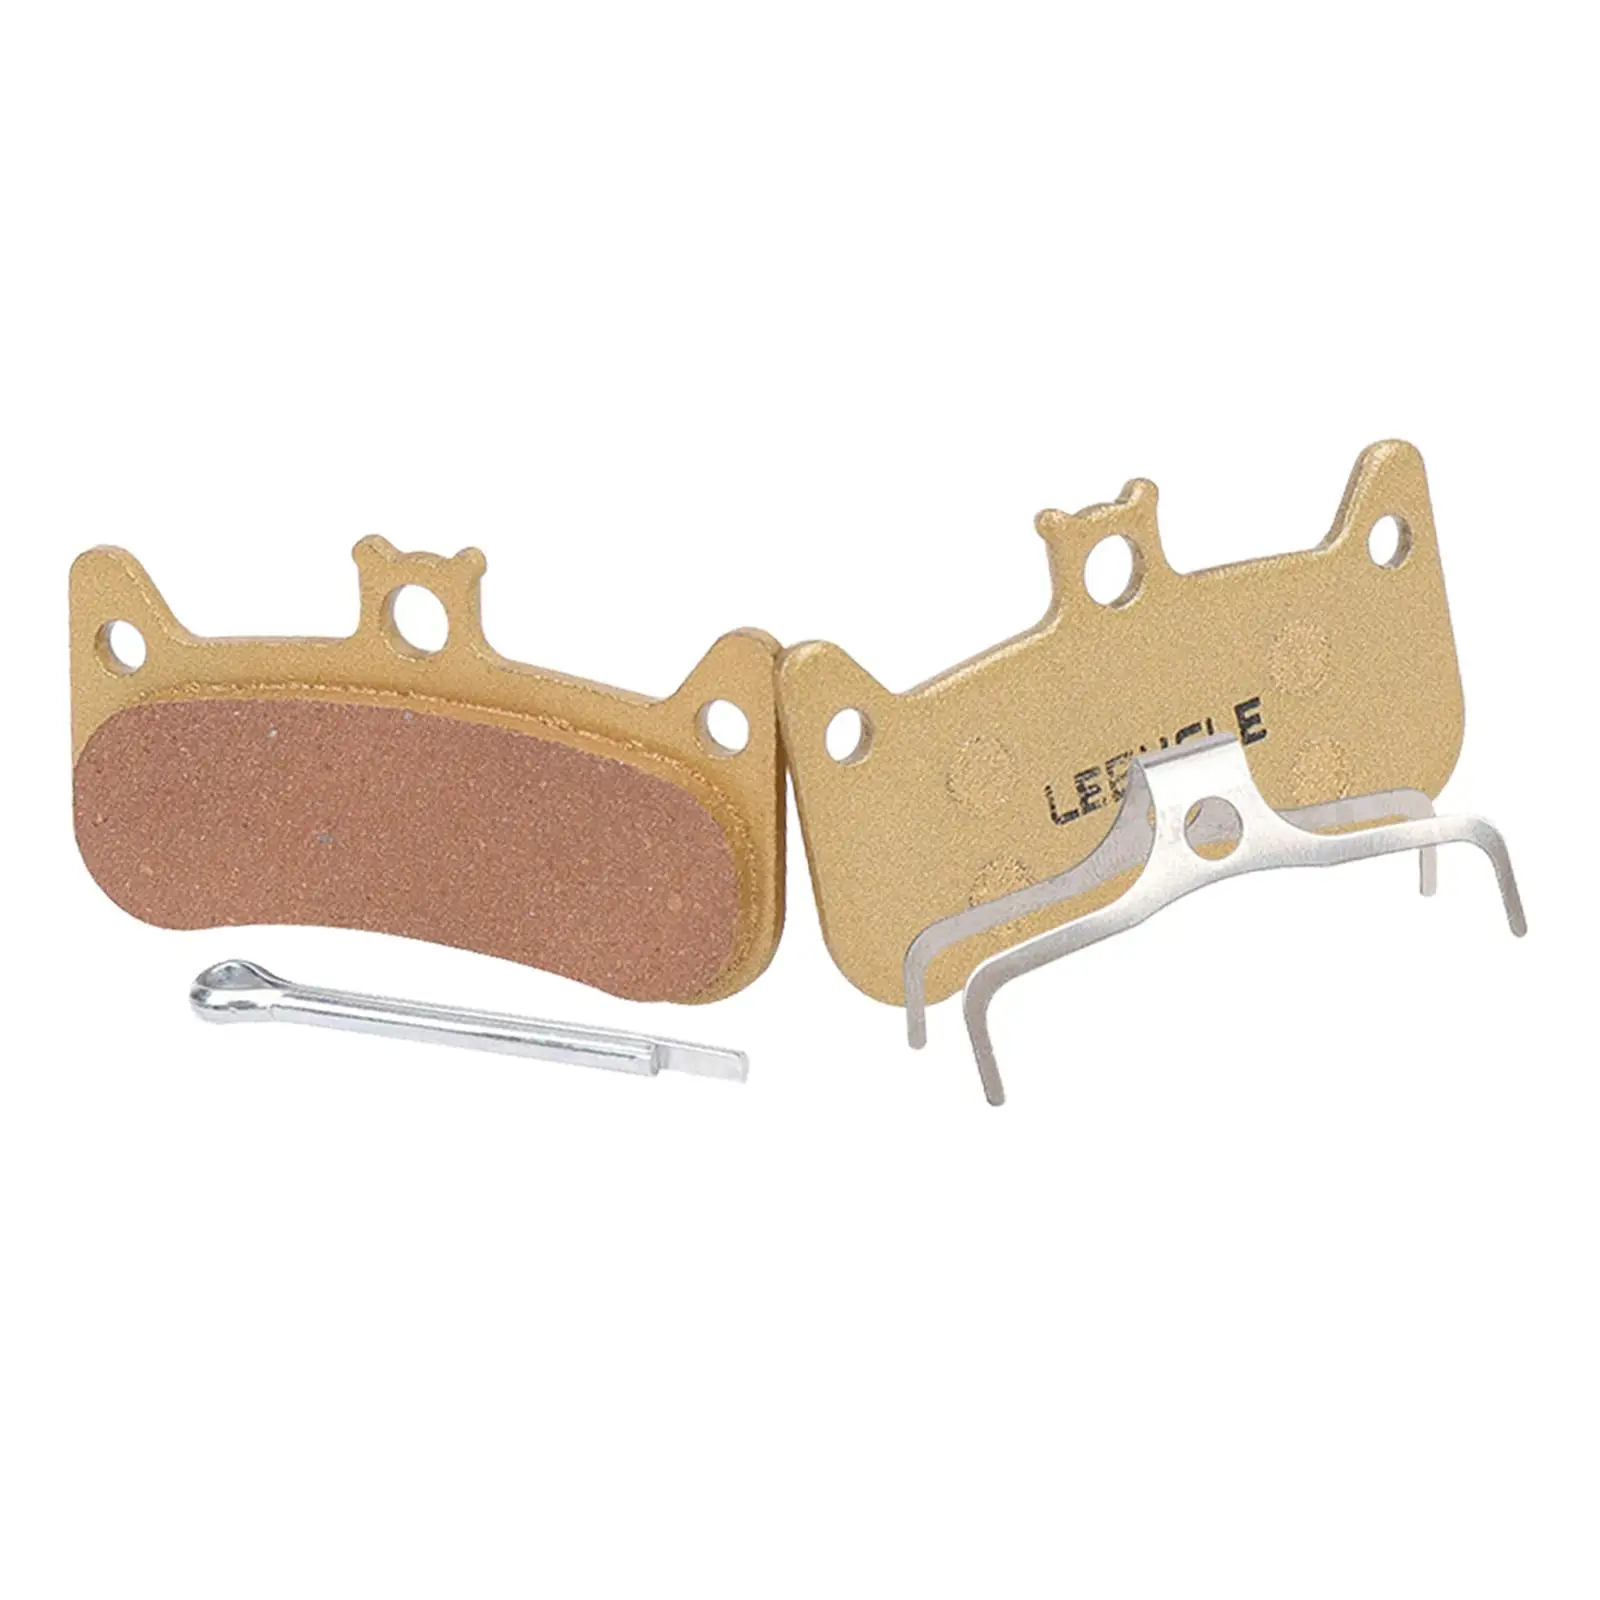 2Pcs Bike Brake Pads Easy to Install Spare Parts Metal Replacement Parts